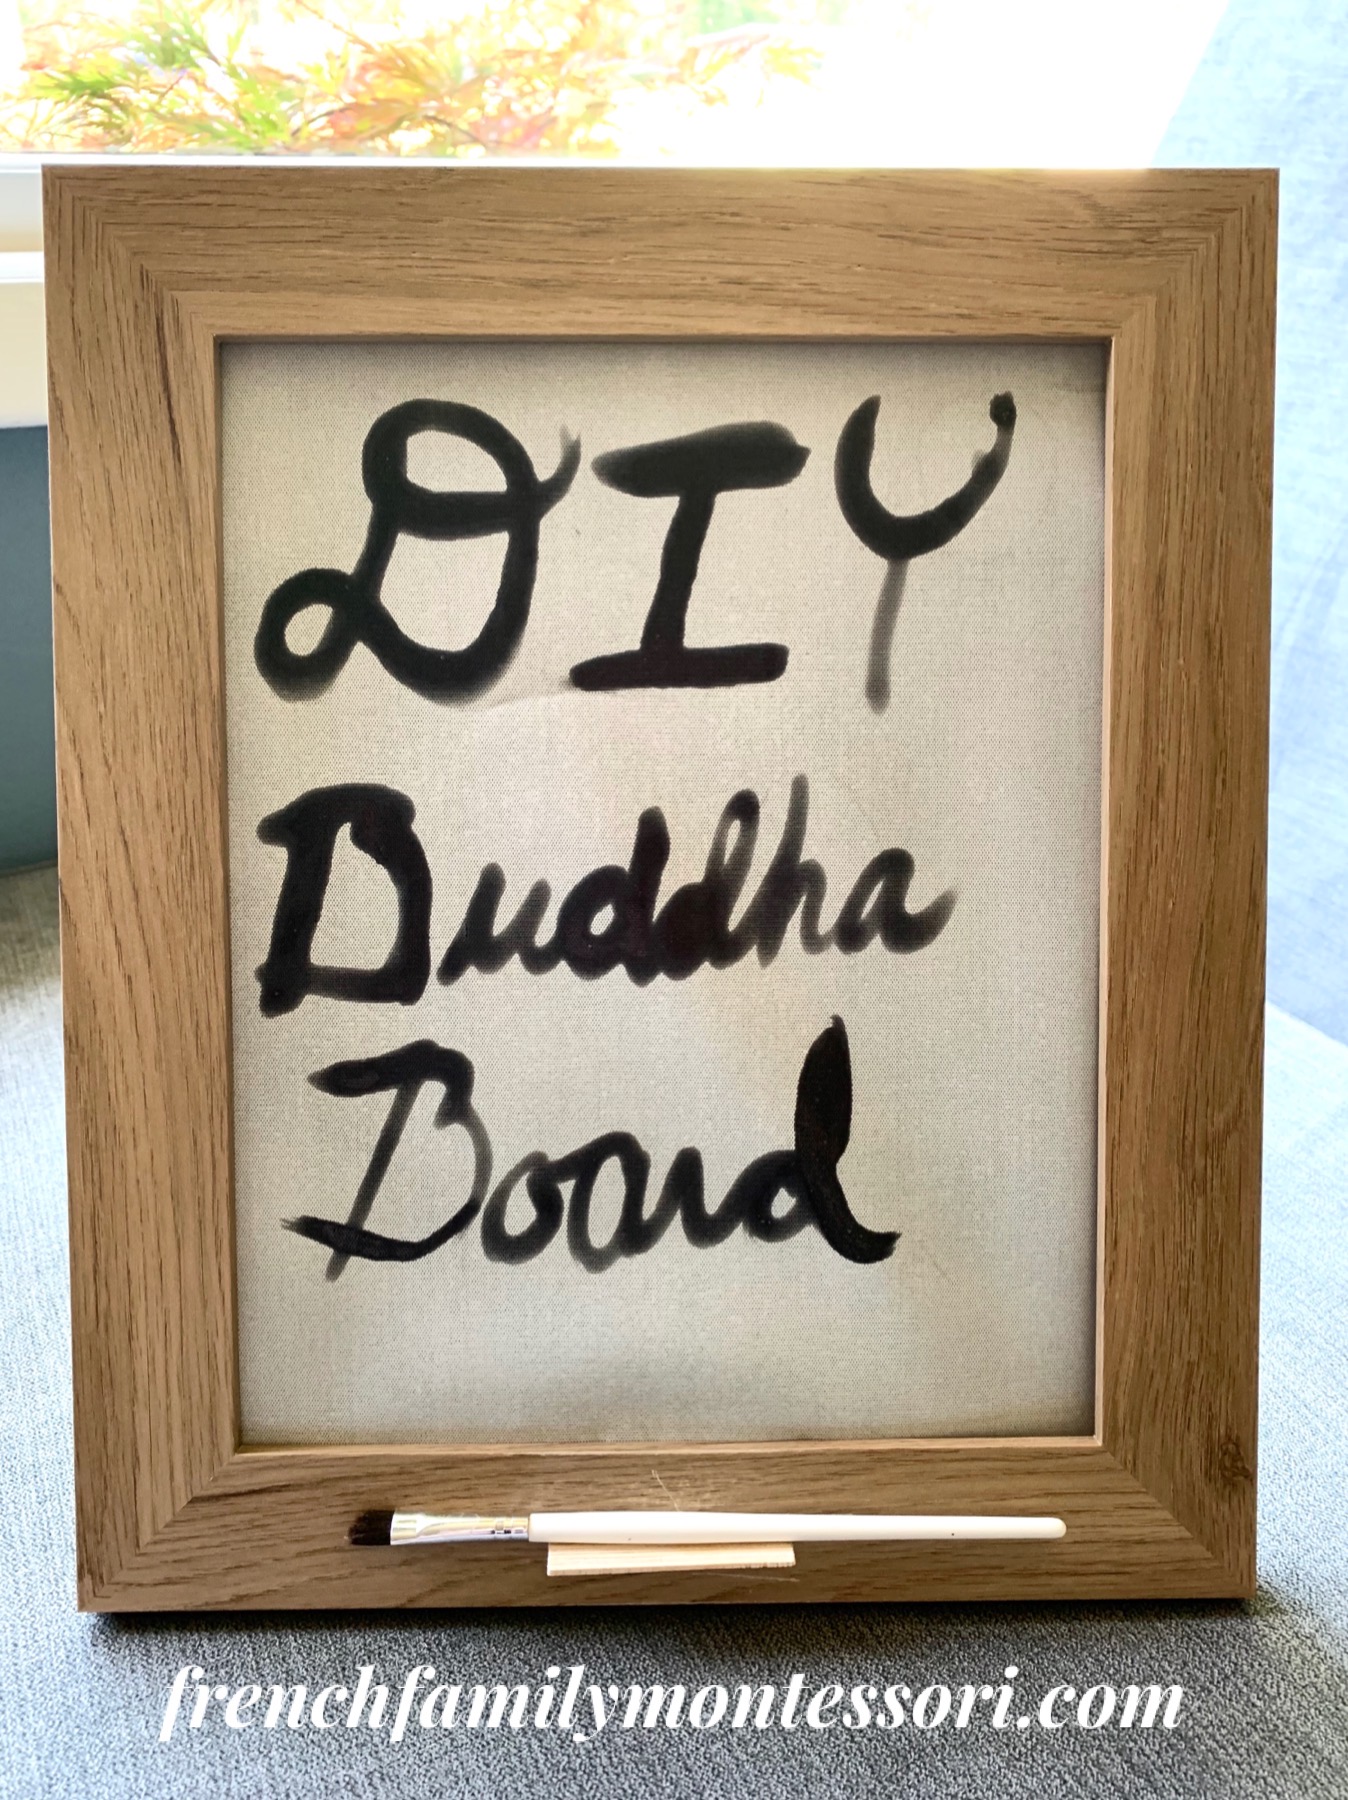 What Temporary Masterpiece Will You Make With The Buddha Board?